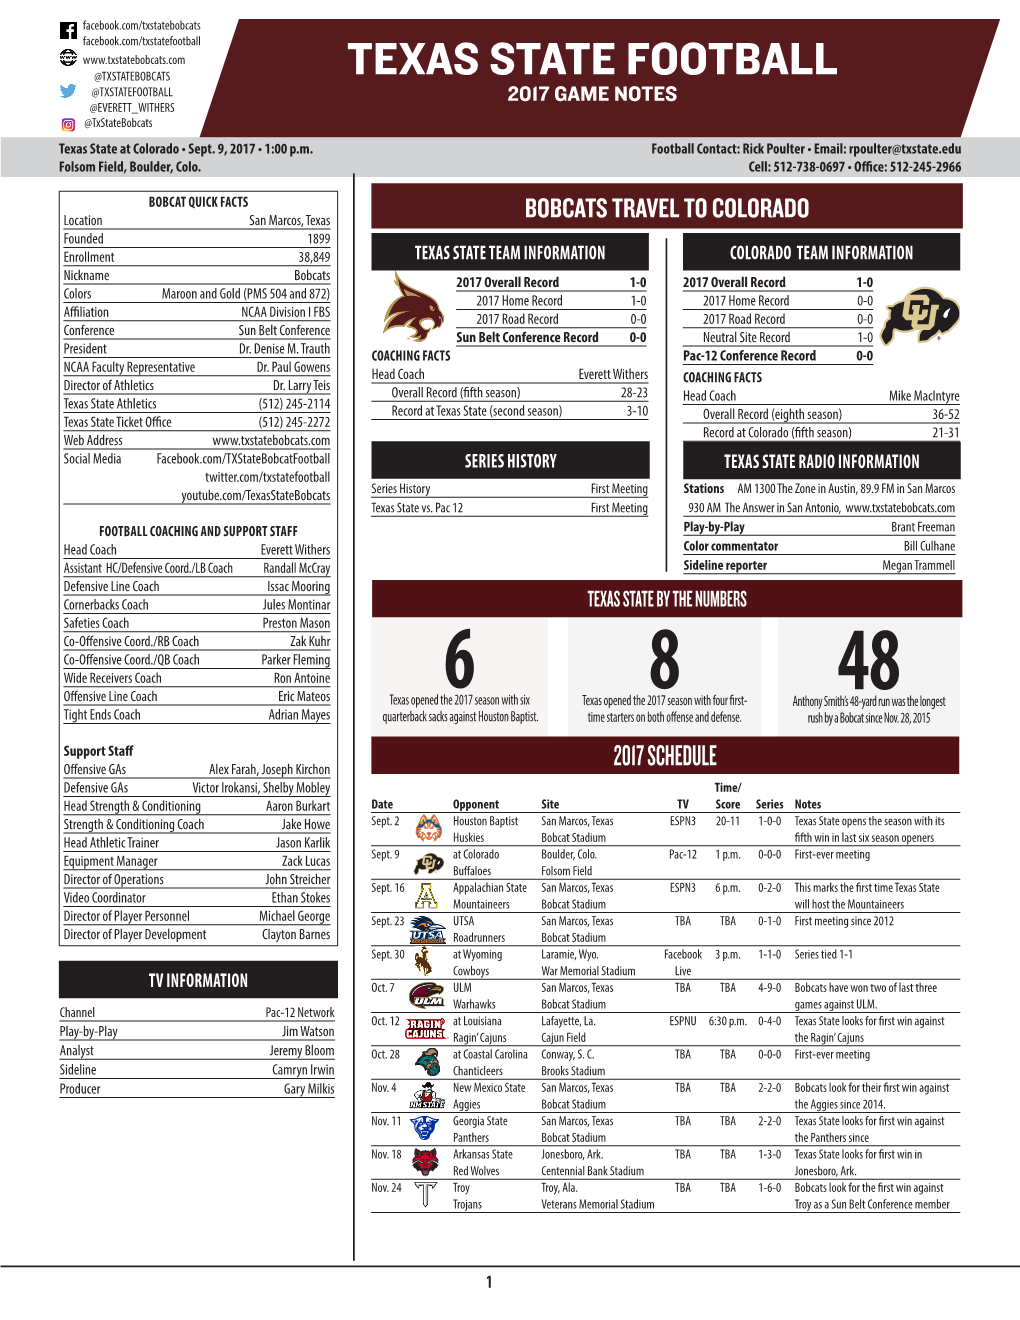 TEXAS STATE FOOTBALL @TXSTATEFOOTBALL 2017 GAME NOTES @EVERETT WITHERS @Txstatebobcats Texas State at Colorado • Sept